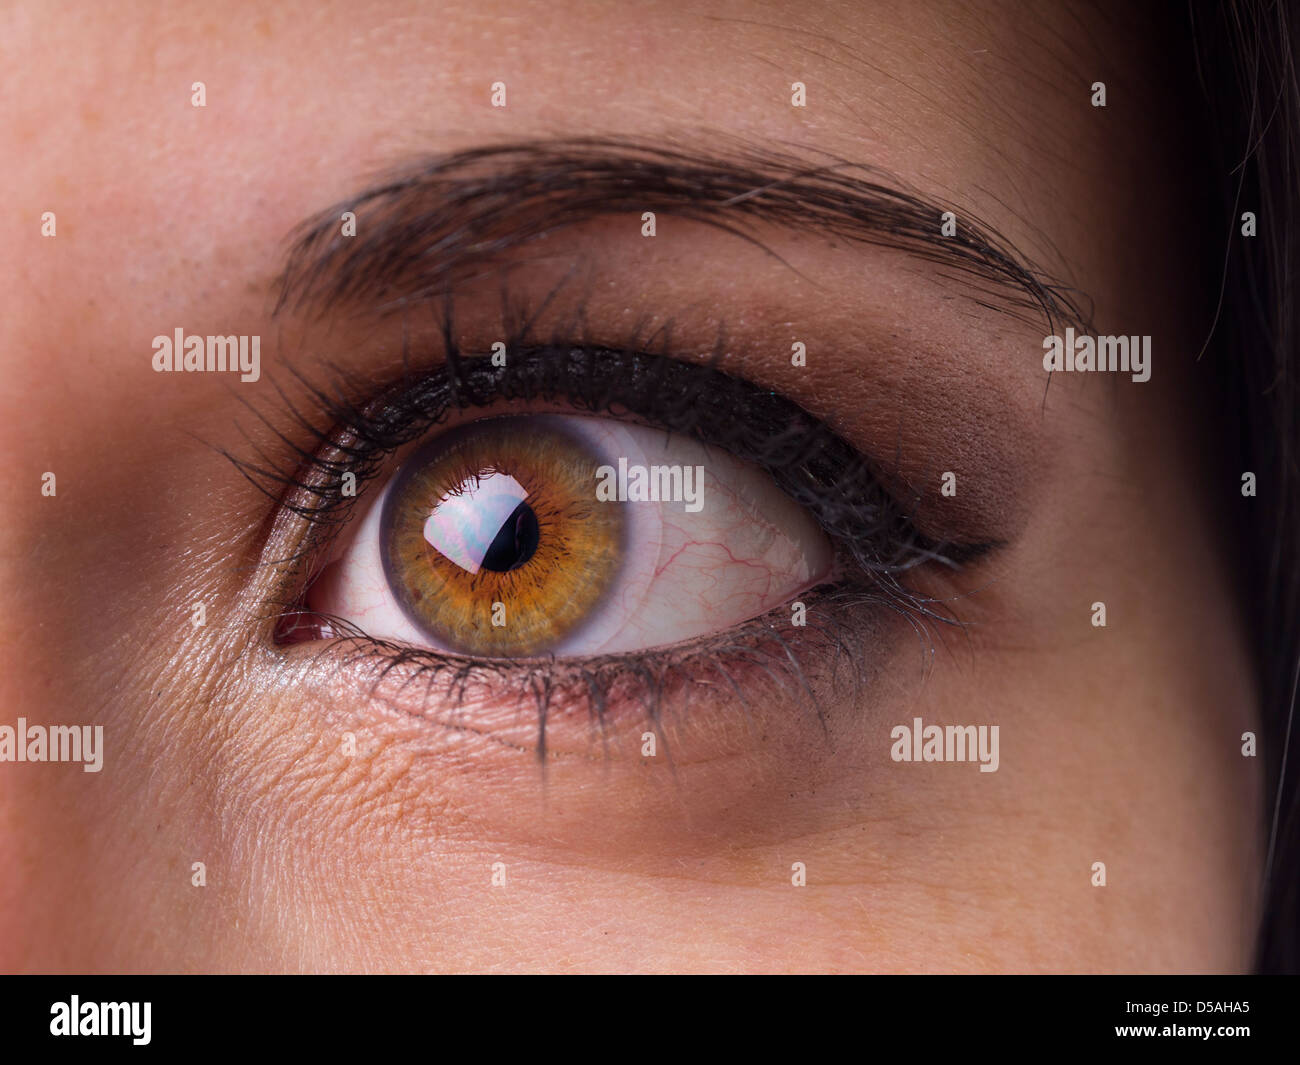 Close up of green and brown female eye with contact lens visible Stock Photo